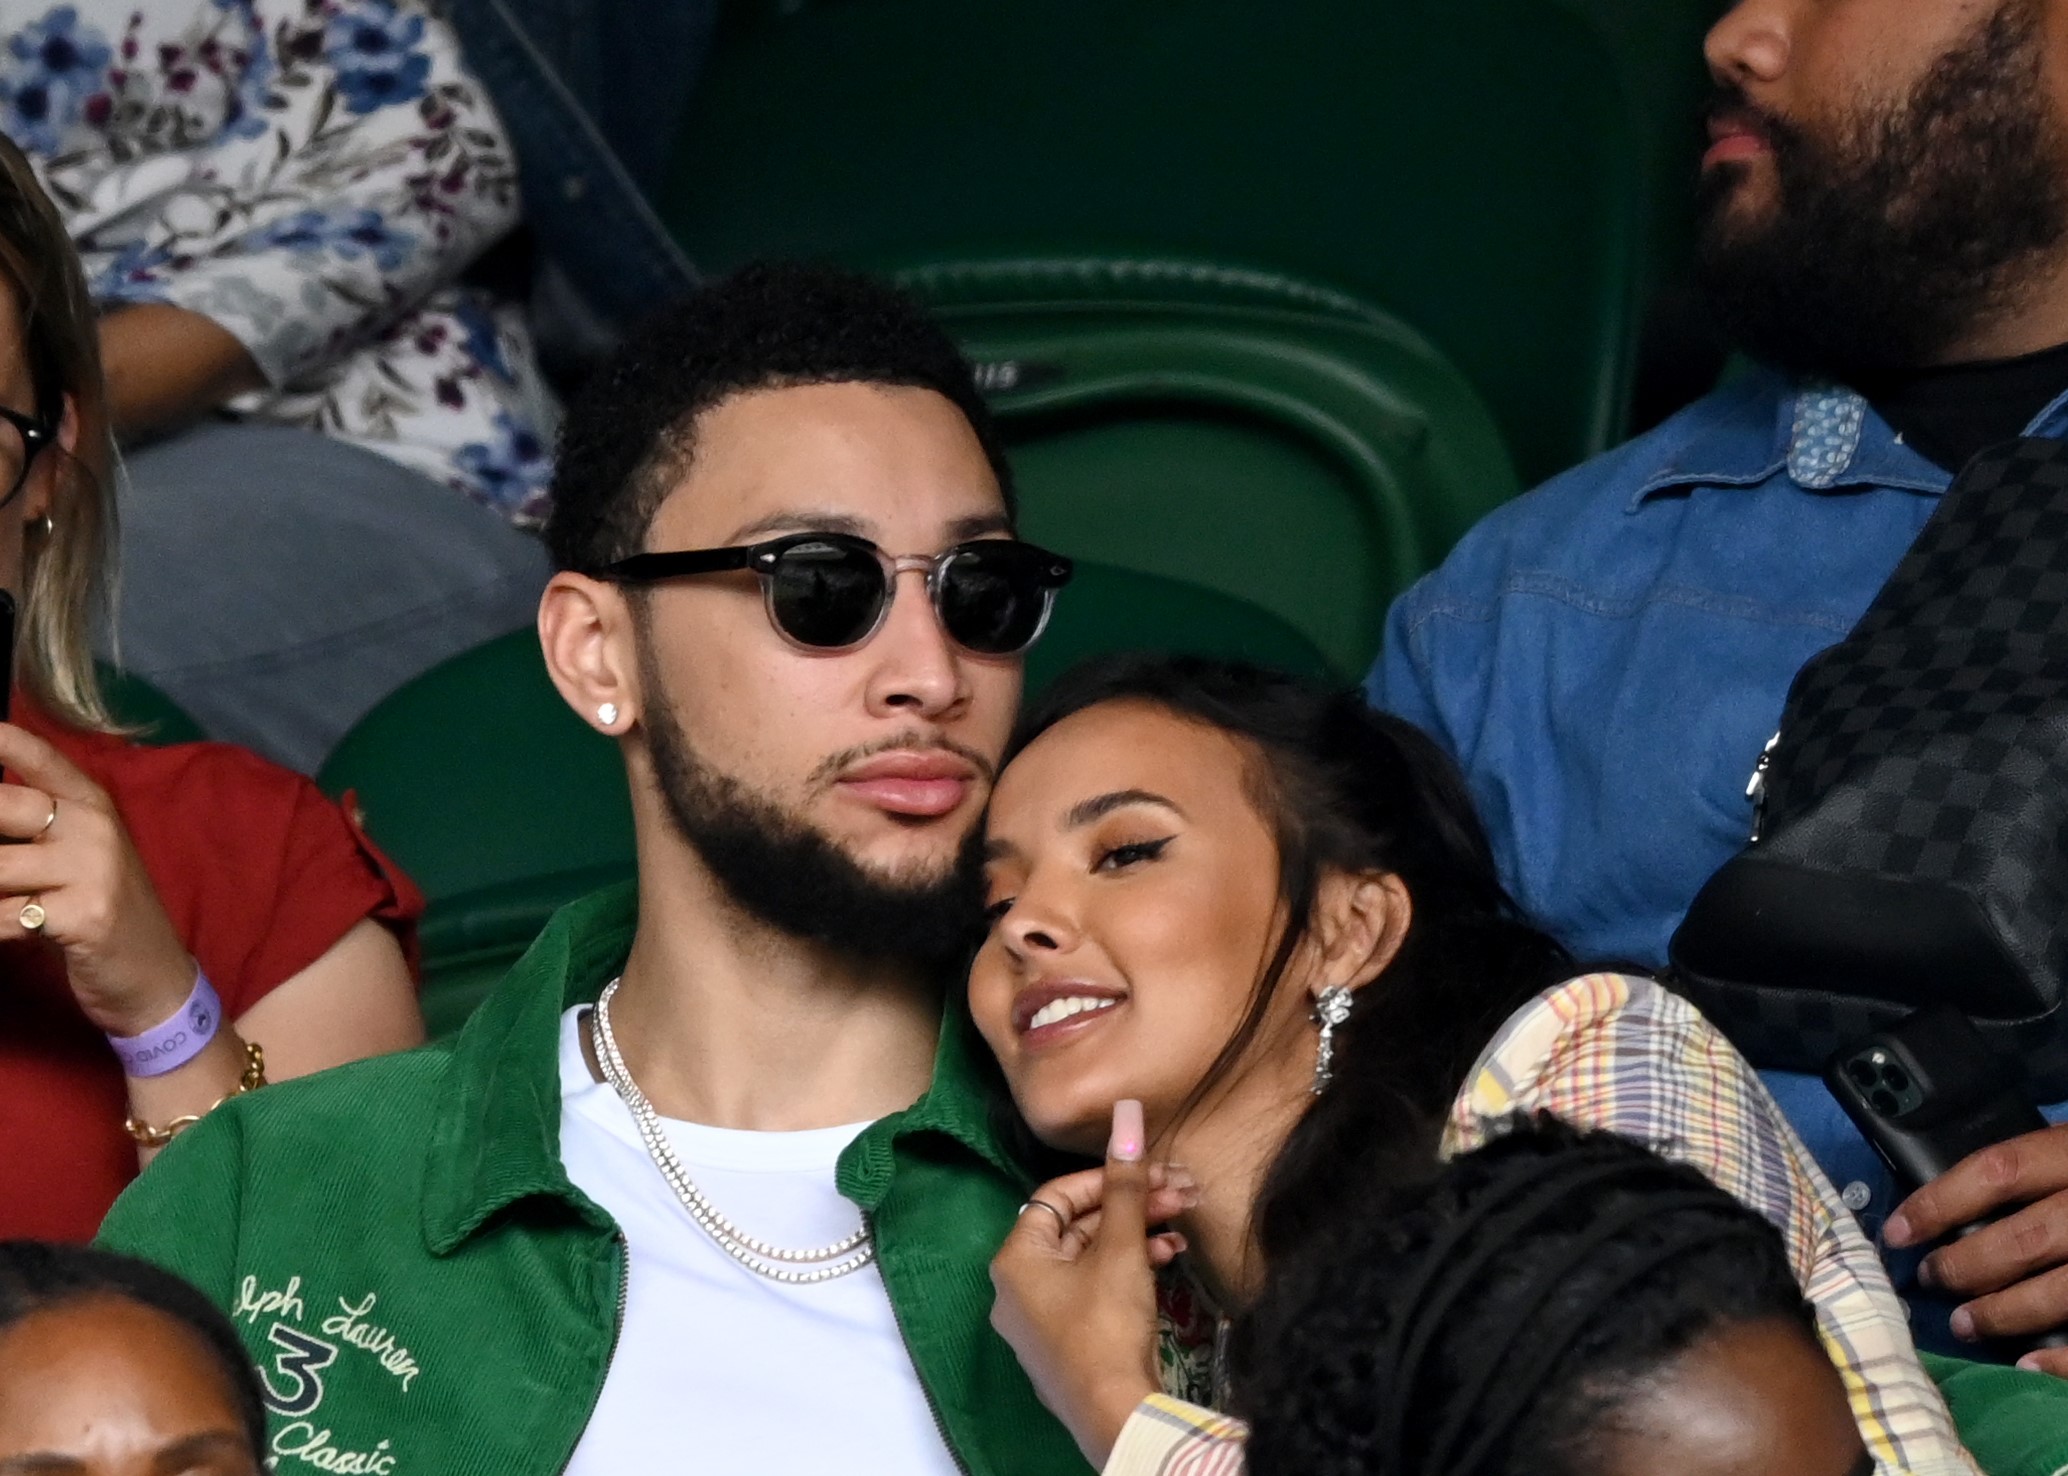 Ben Simmons and Maya Jama getting cozy in the stands at Wimbledon Championships